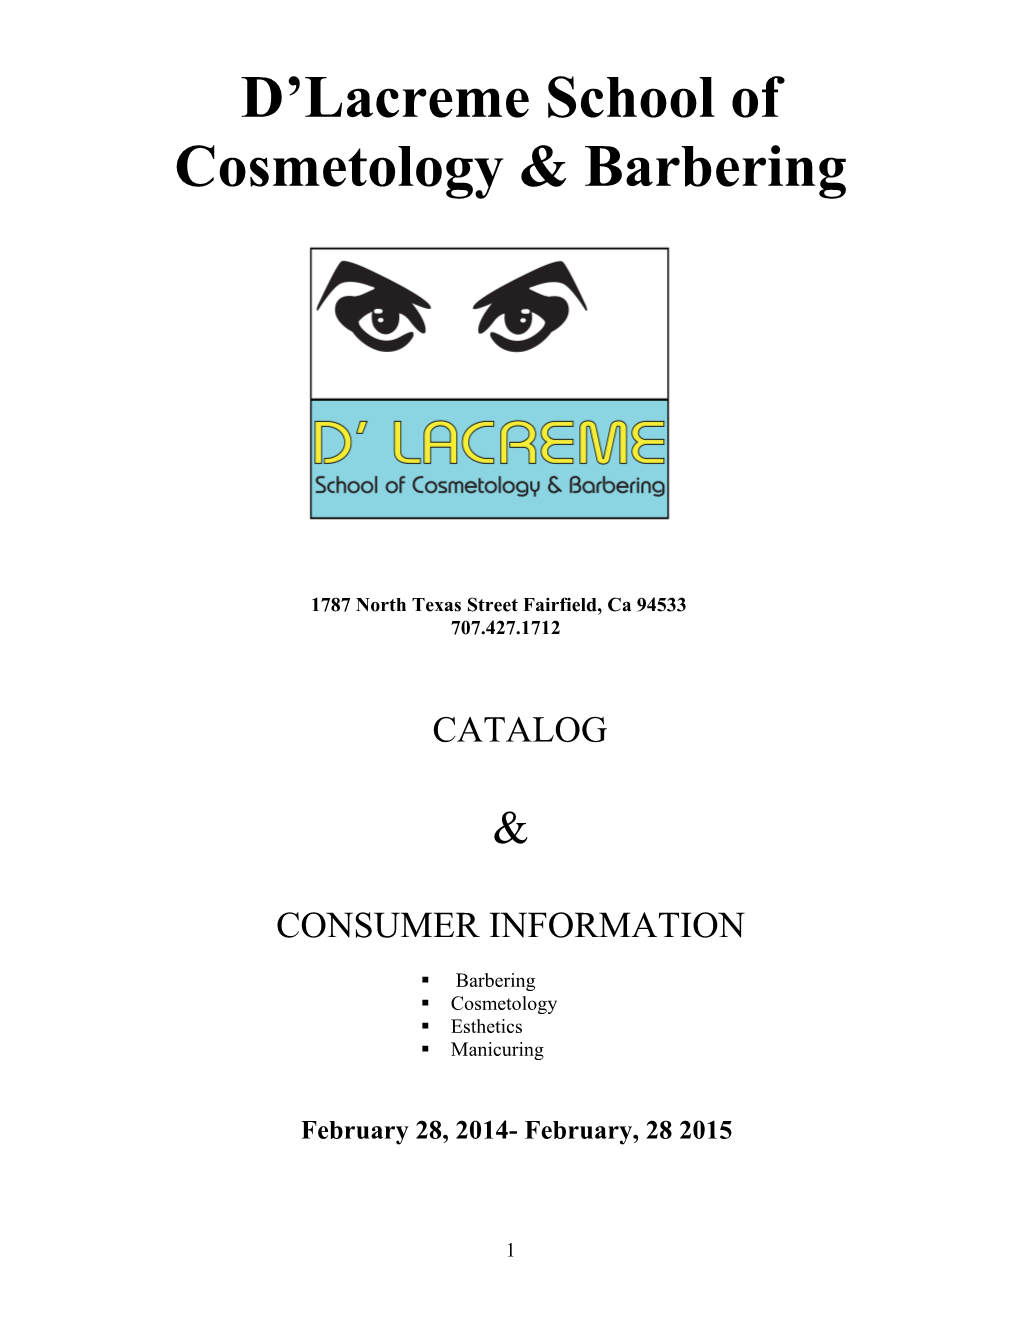 D Lacreme School of Cosmetology & Barbering